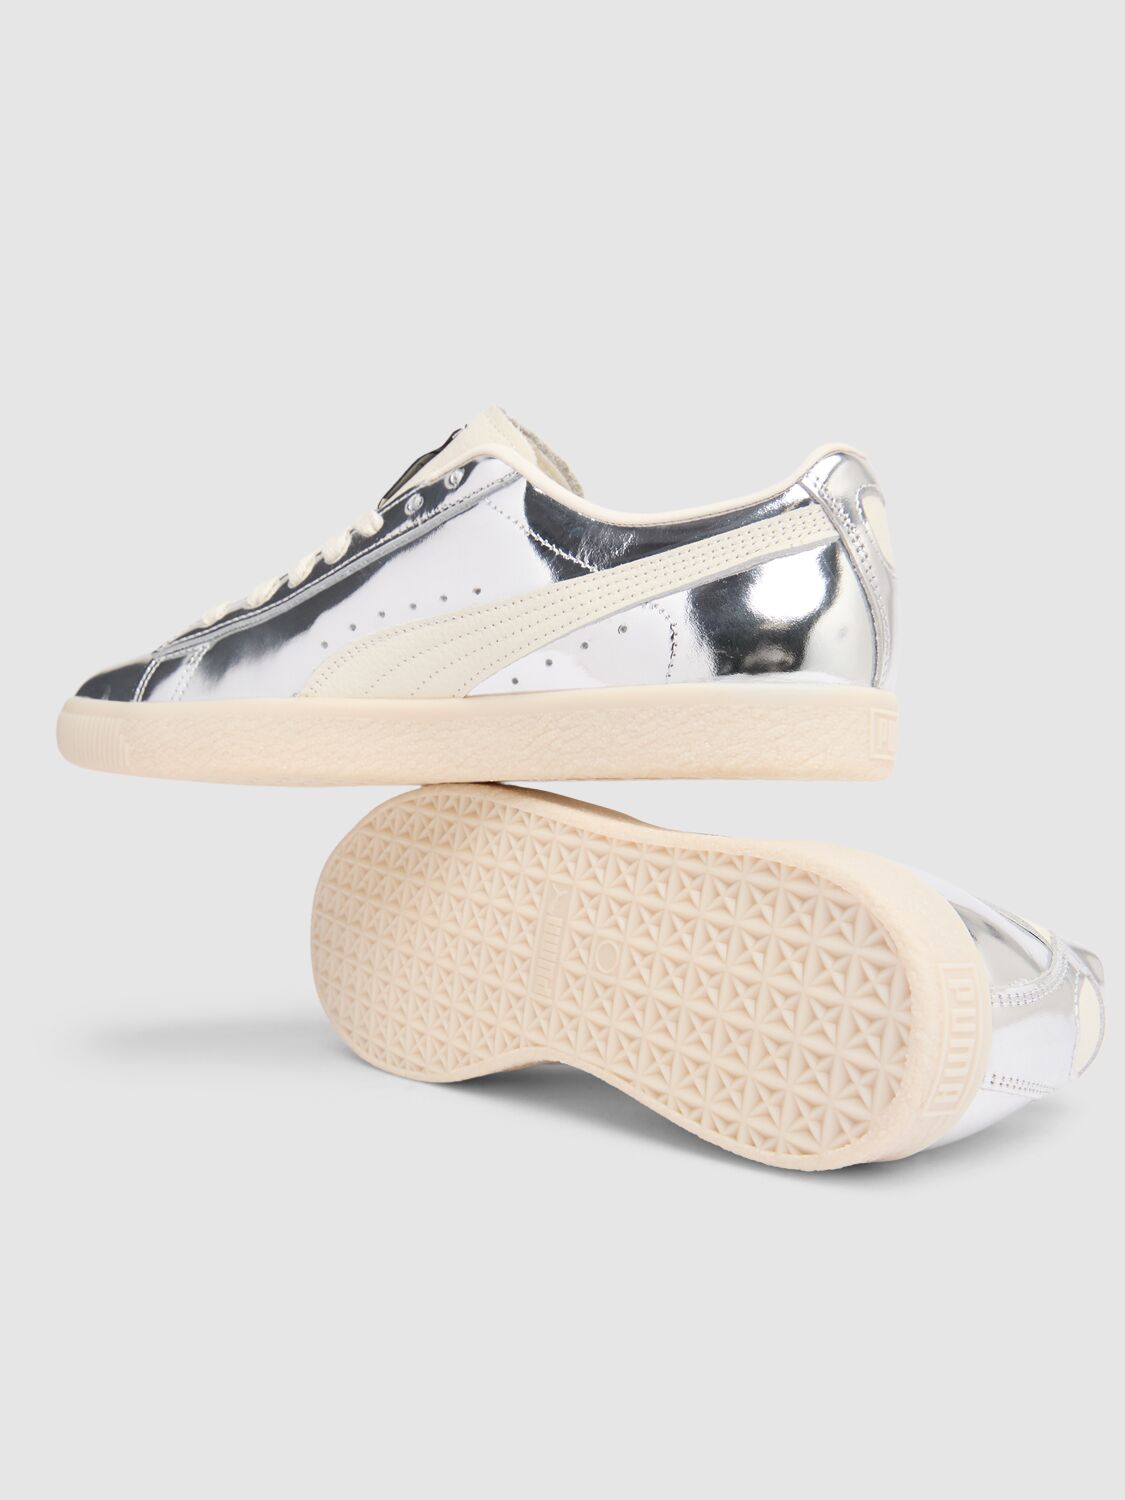 Shop Puma Clyde 3024 Sneakers In Silver